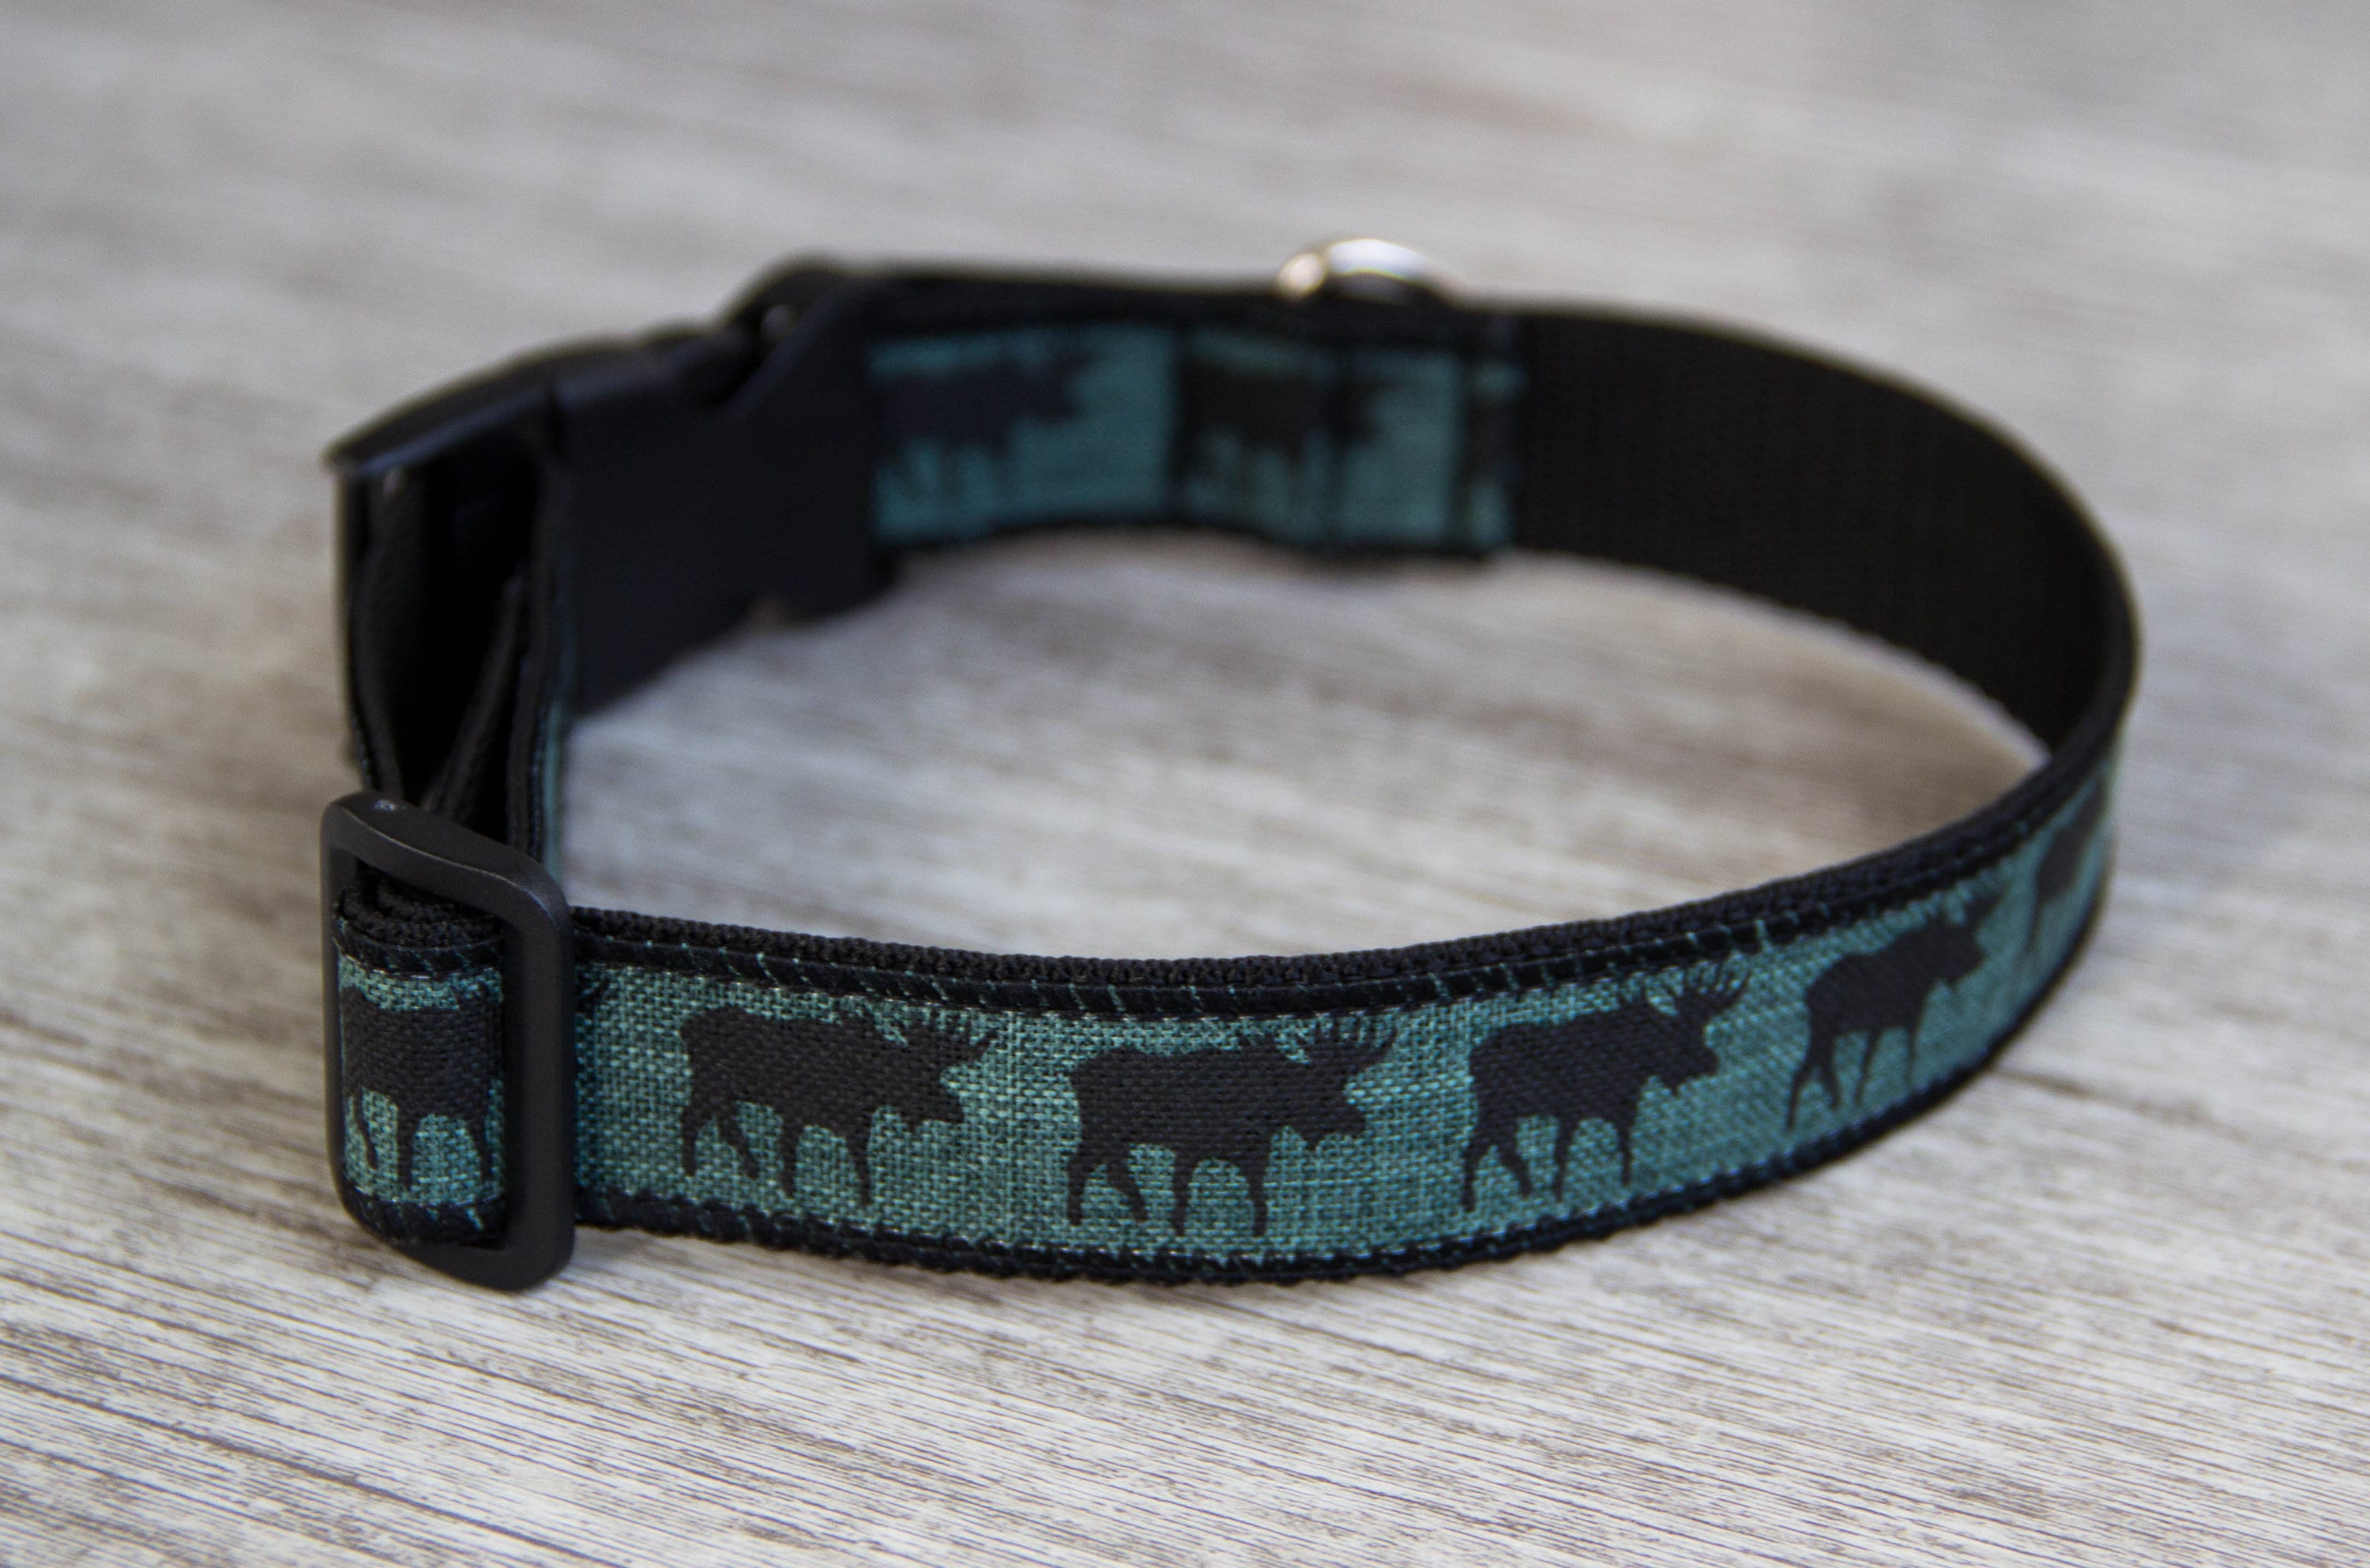 Moose Pet Wear Dog Collar University Illinois Adjustable Pet Collars 1 Inch Wide Made in The USA 